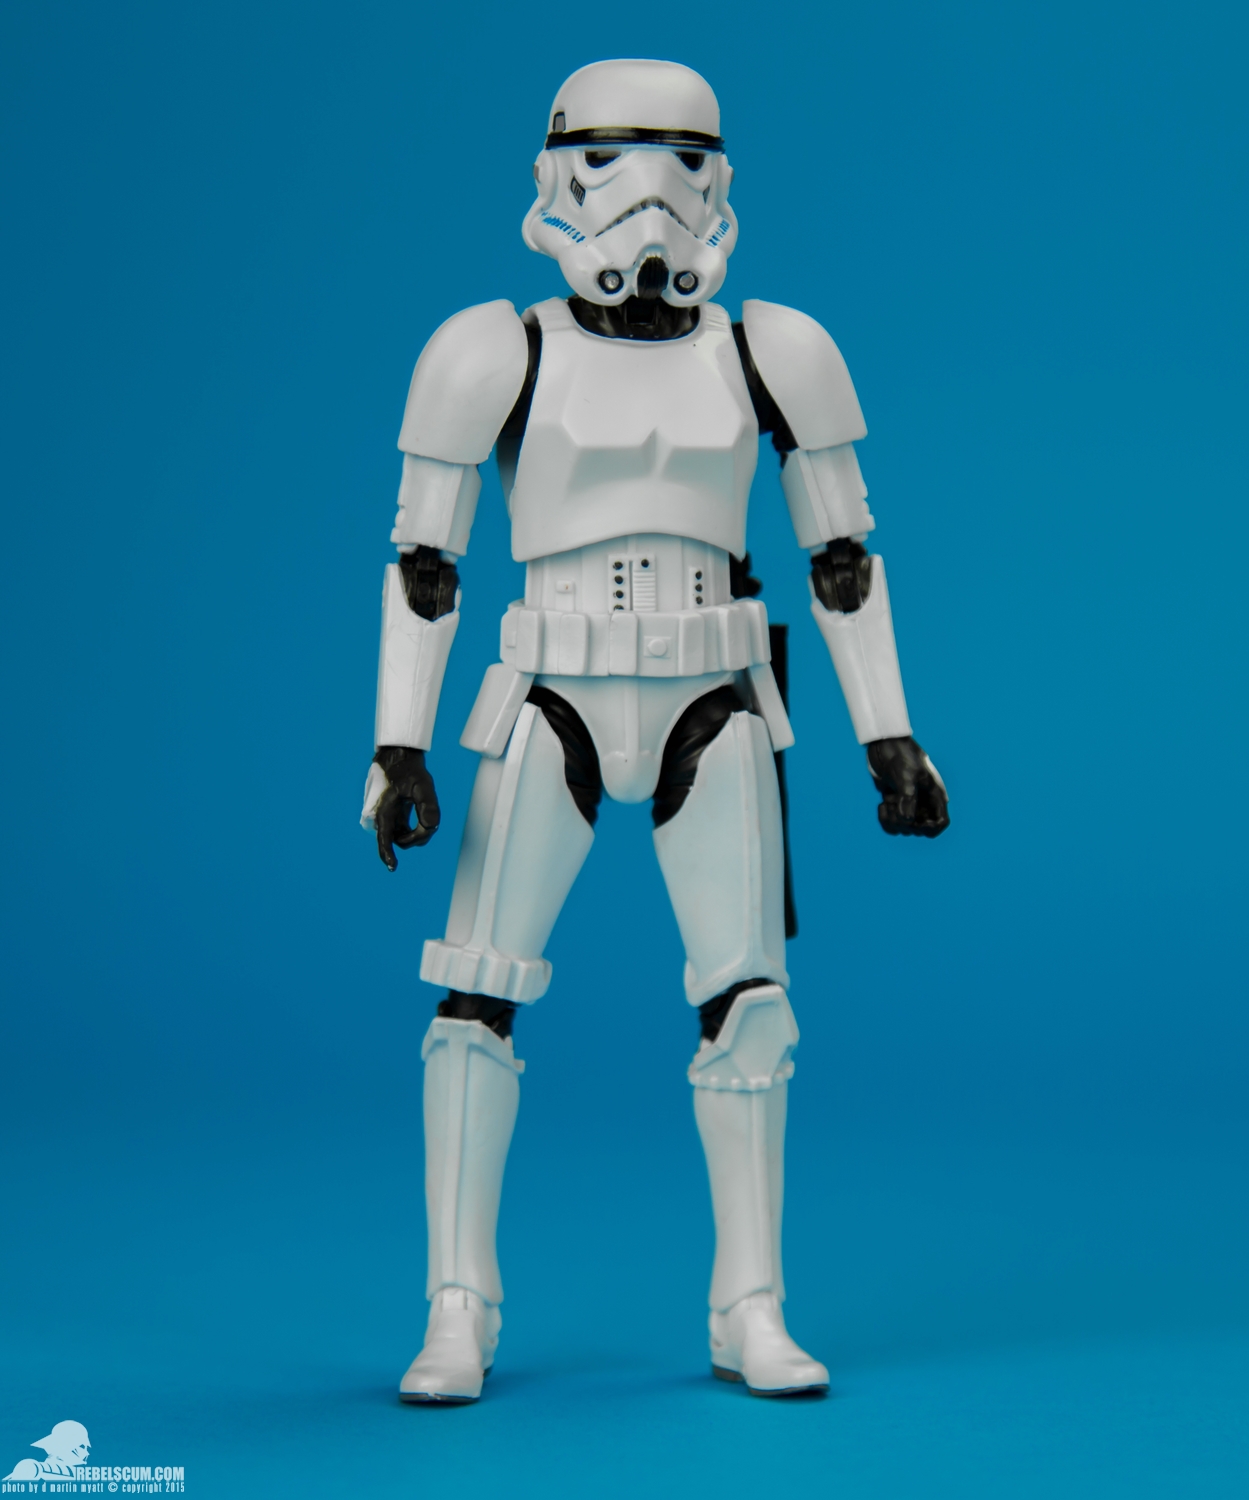 09-Han-Solo-Stormtrooper-Disguise-6-inch-The-Black-Series-005.jpg